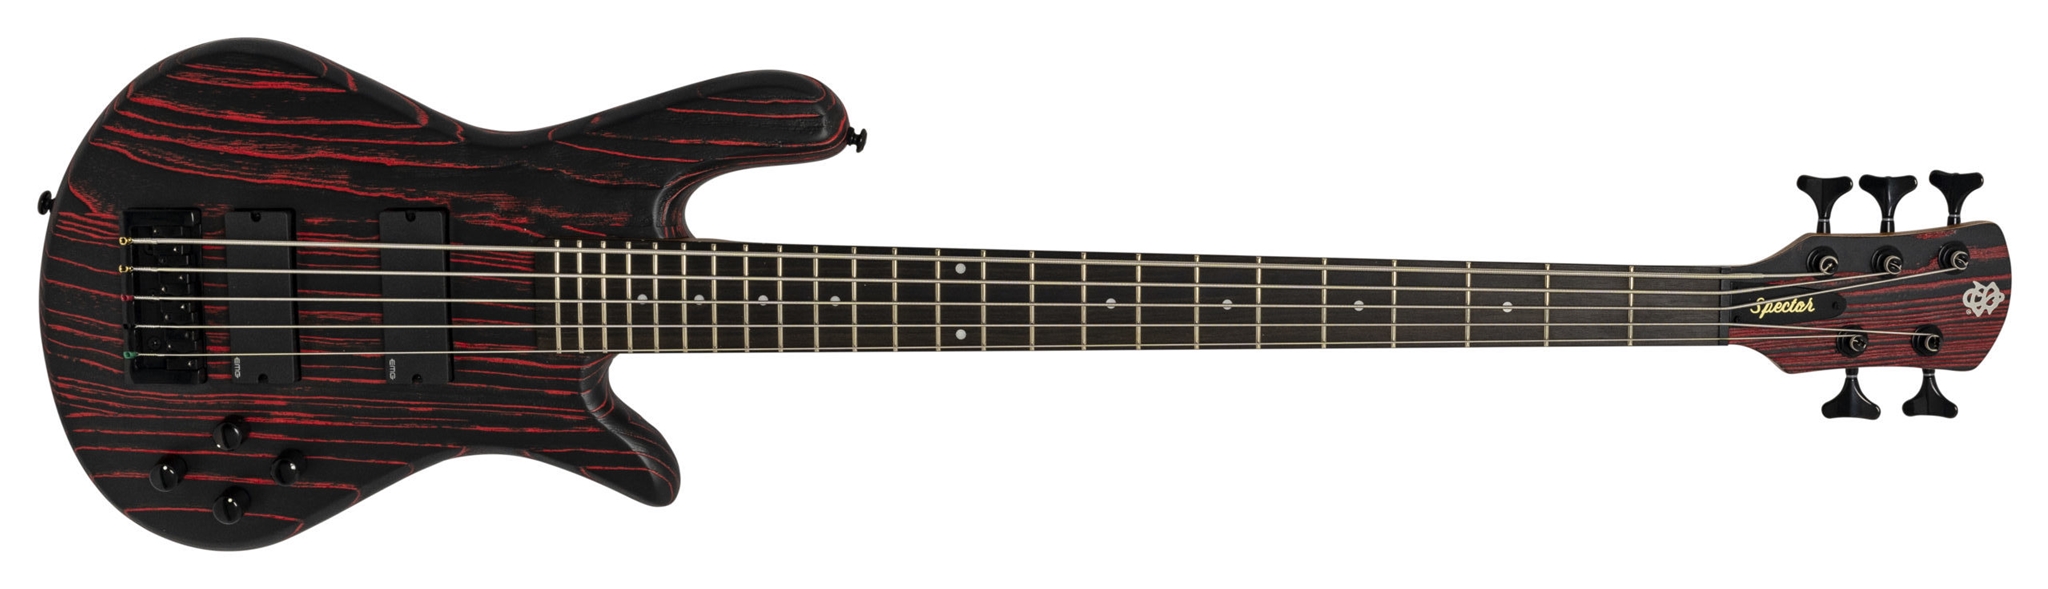 Spector NS Pulse-5 Cinder Red 5-String Electric Bass Guitar  